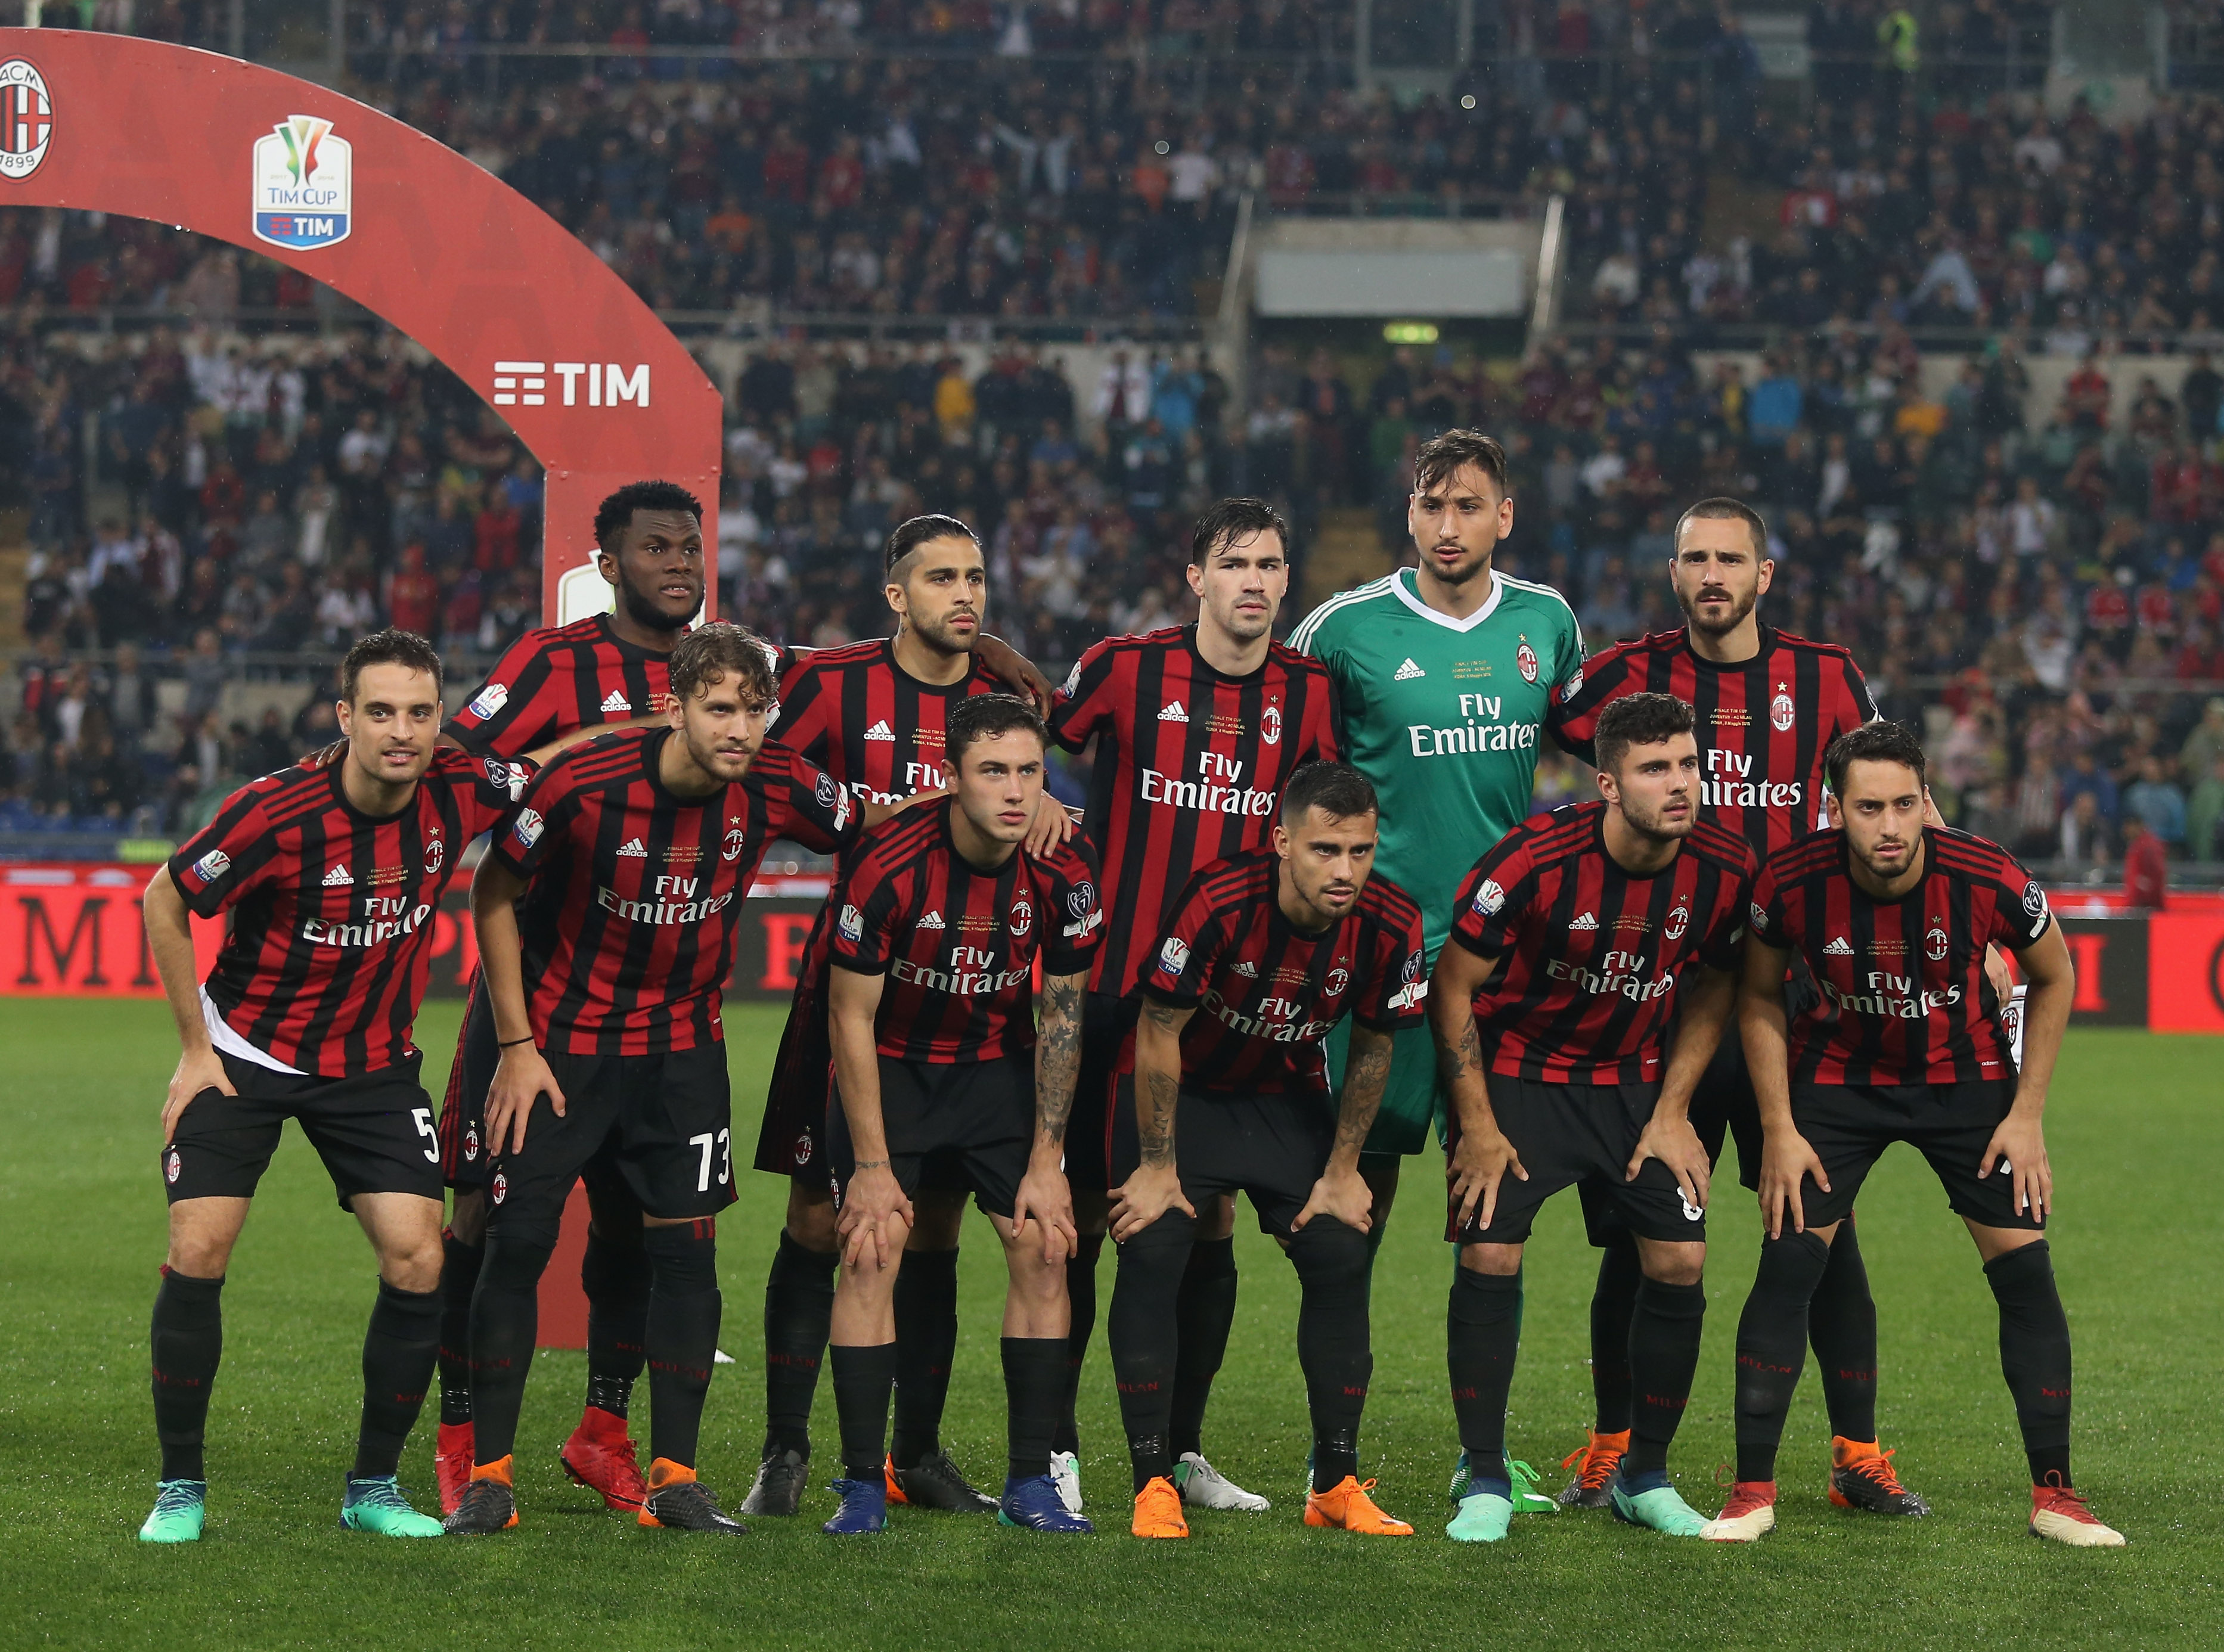 ROME, ITALY - MAY 09: AC Milan poses during the TIM Cup Final between Juventus and AC Milan at Stadio Olimpico on May 9, 2018 in Rome, Italy.  (Photo by Paolo Bruno/Getty Images)